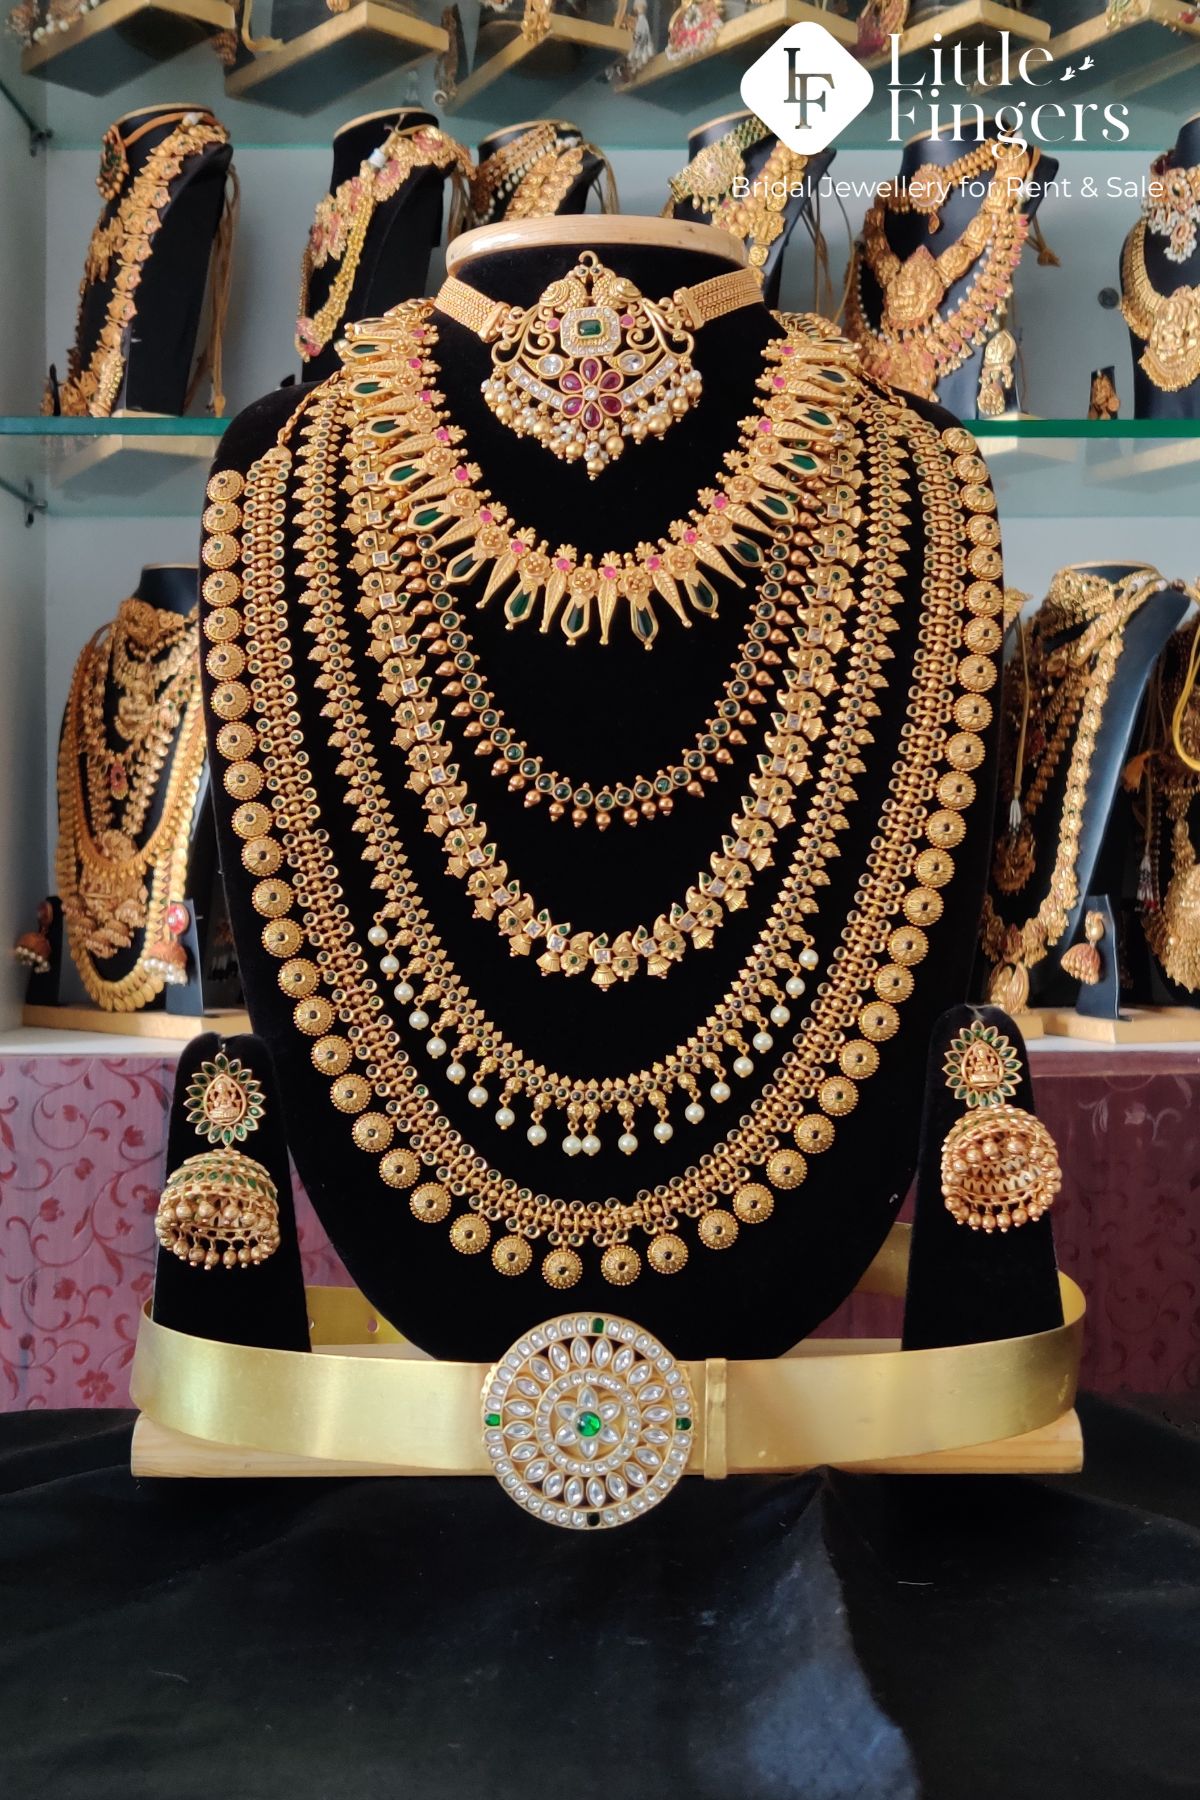 Multi Layer Bridal Jewellery For Rent Online - Little Fingers India